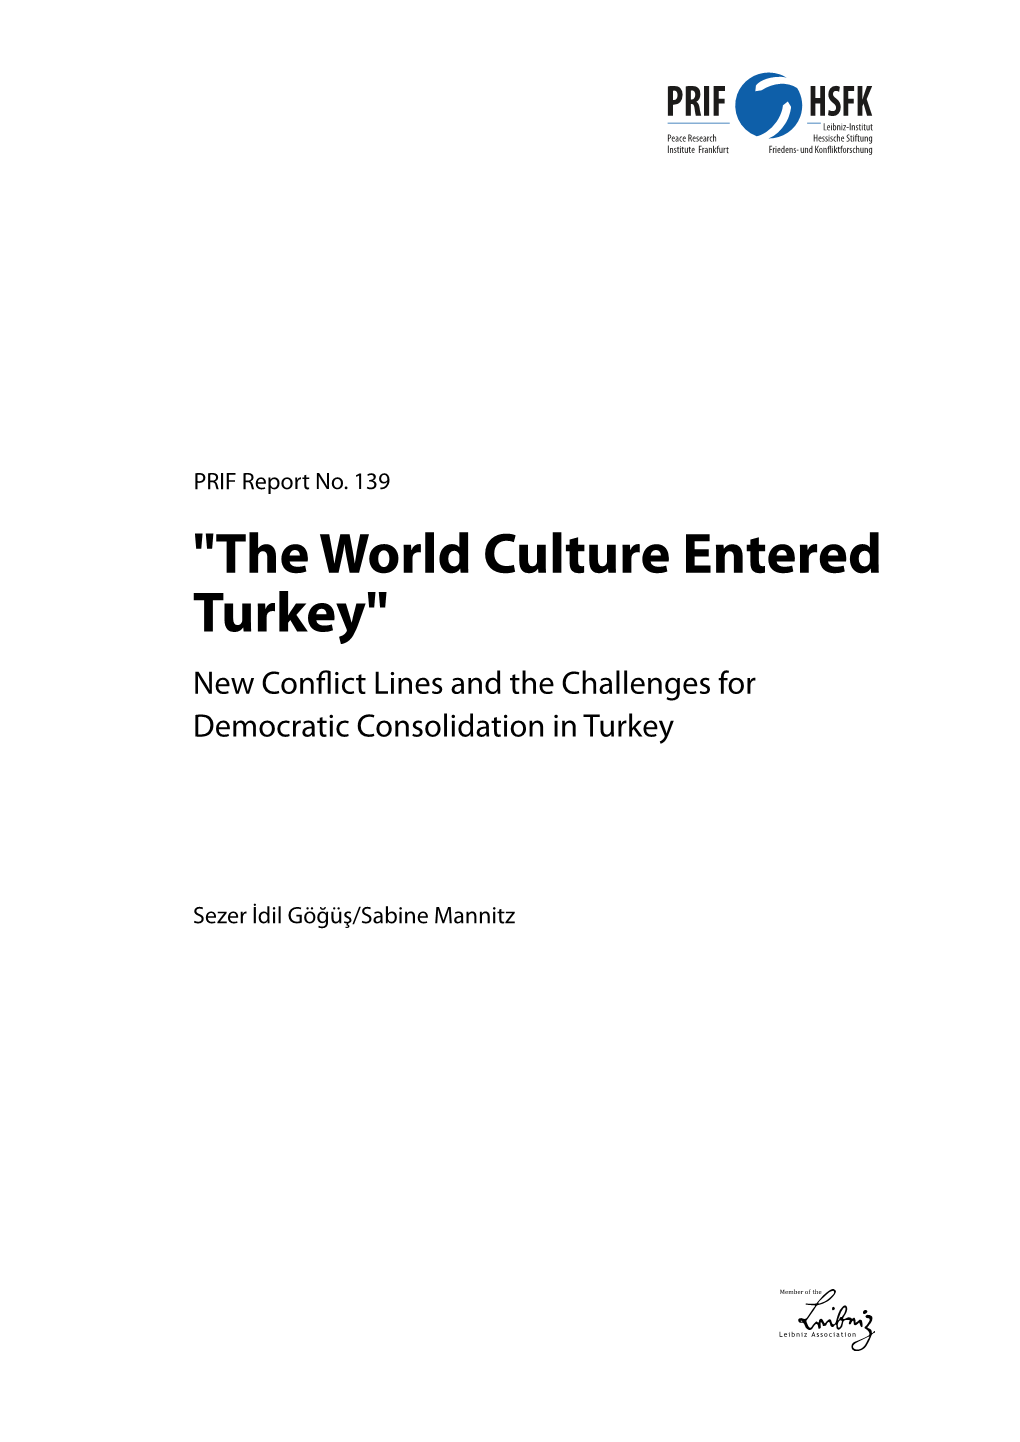 "The World Culture Entered Turkey" New Conflict Lines and the Challenges for Democratic Consolidation in Turkey